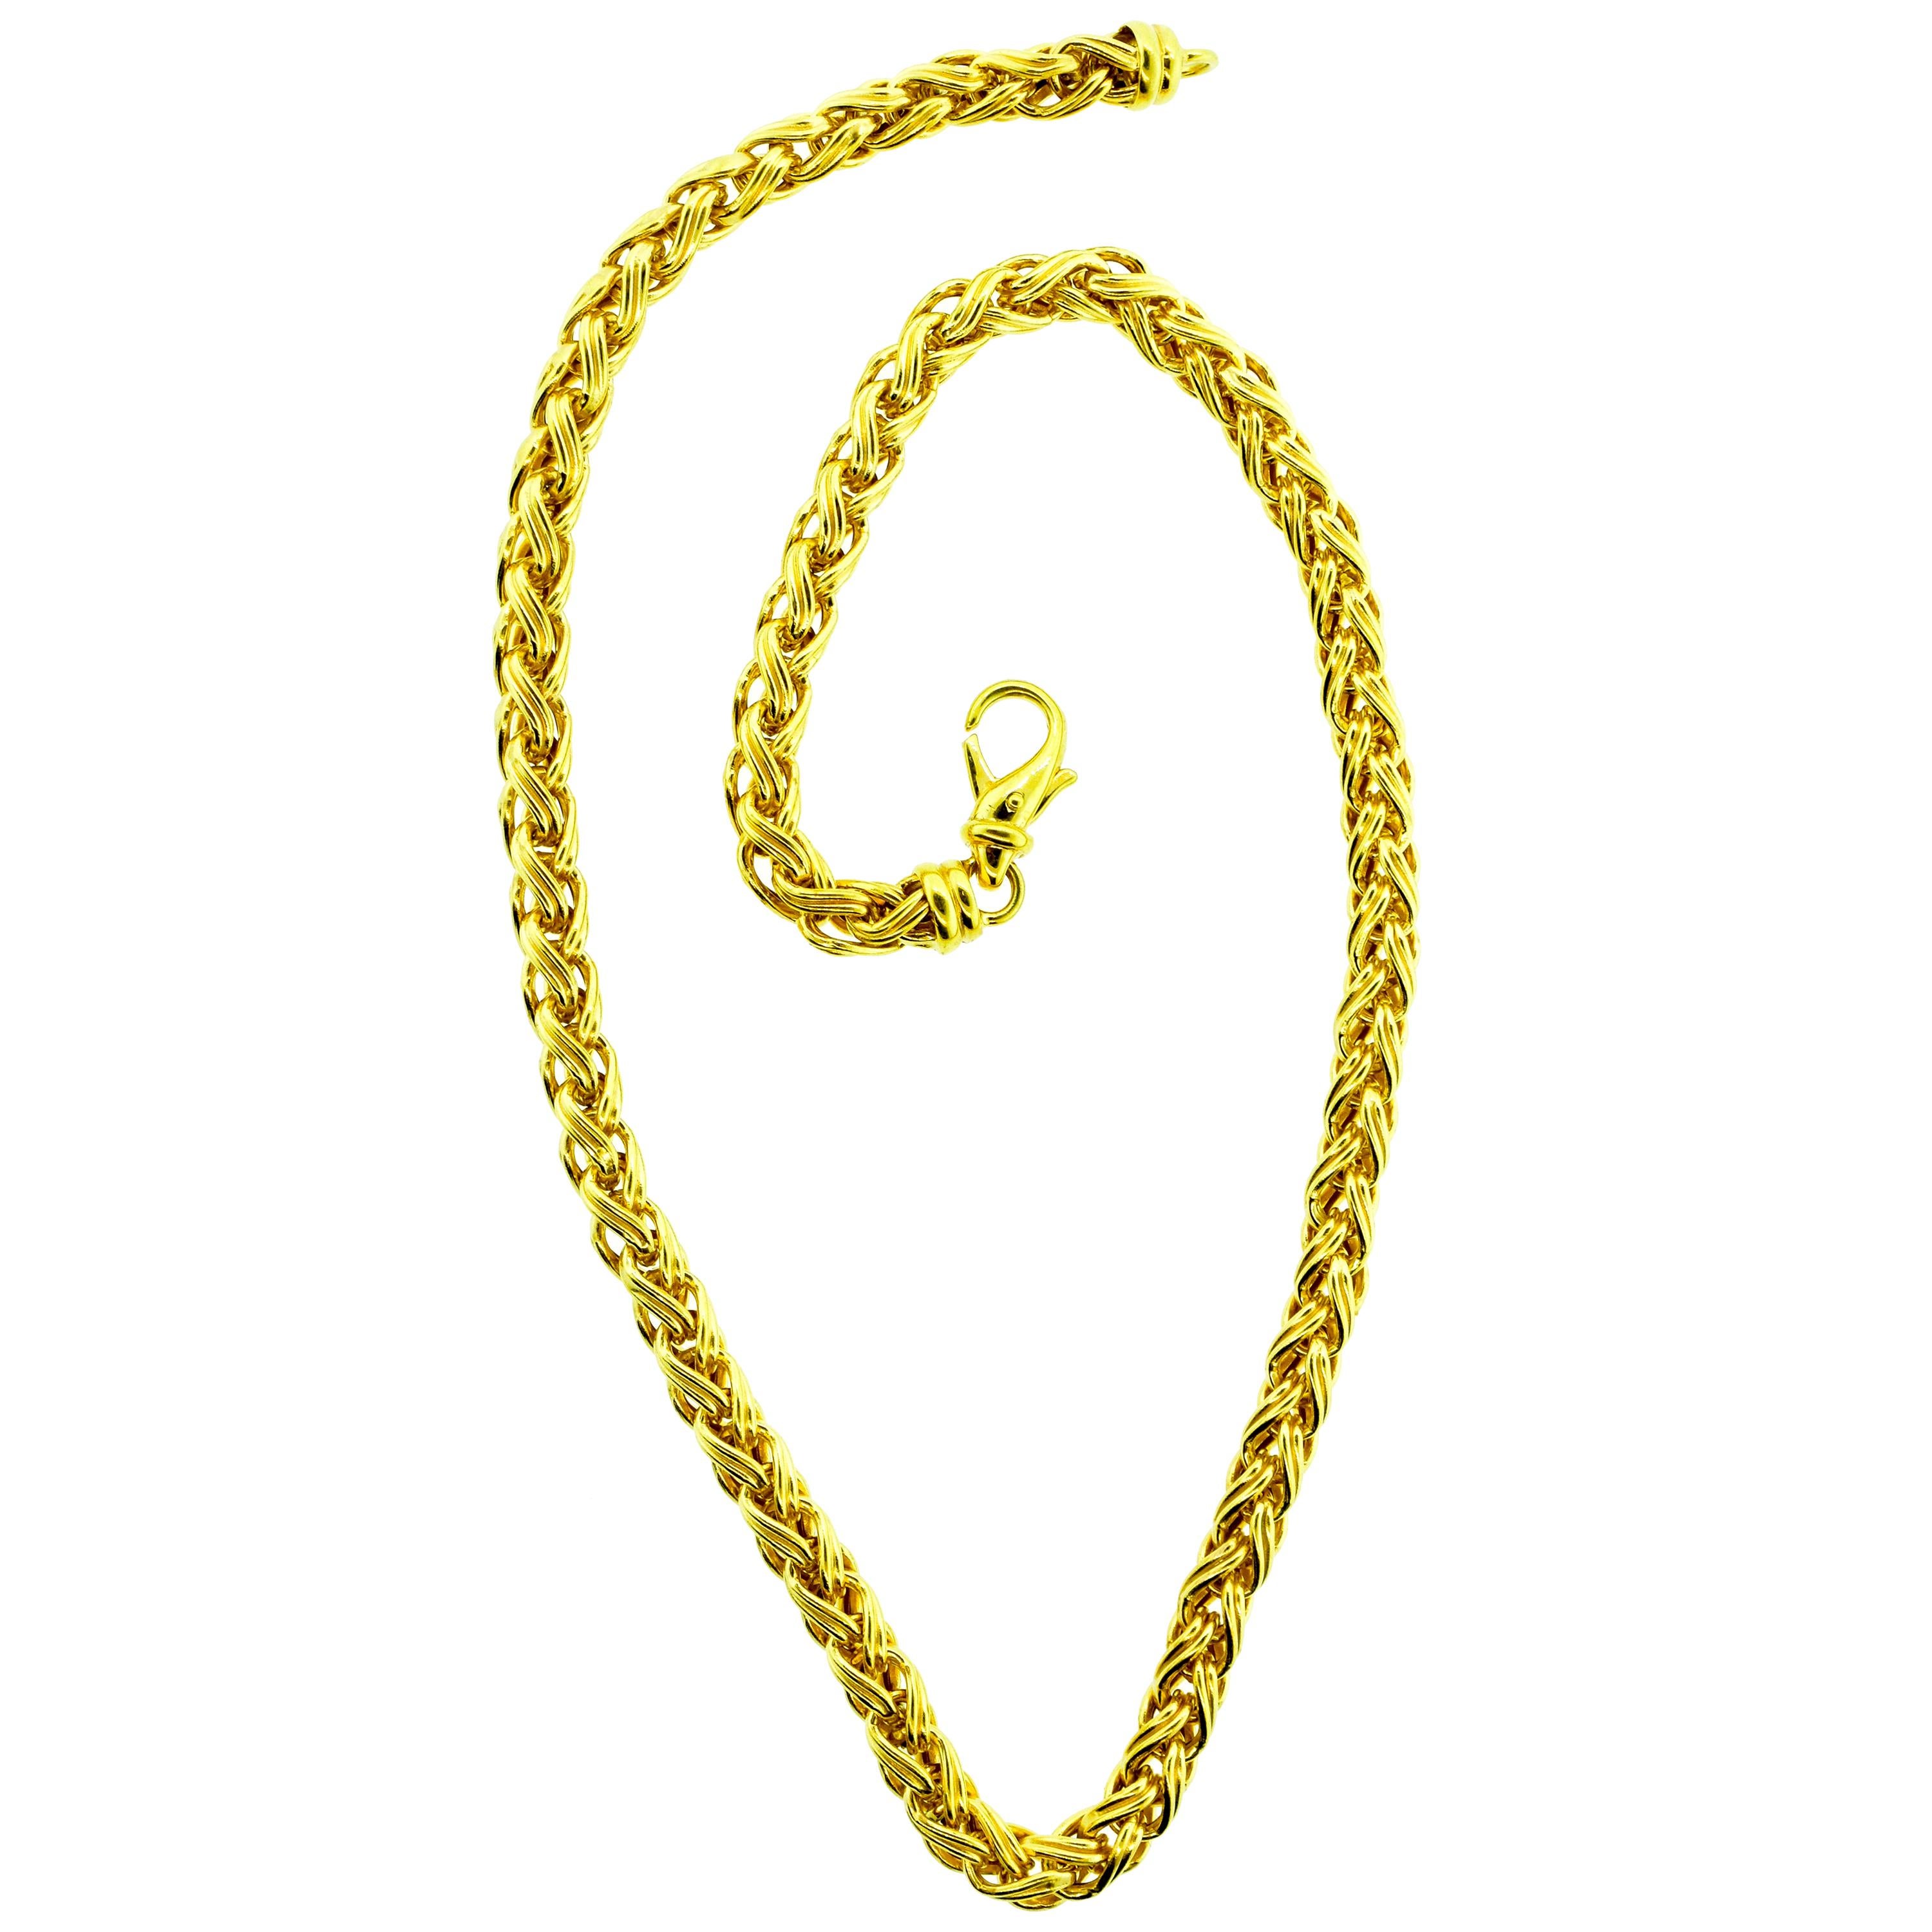 Gold Necklace Chain of Woven Design